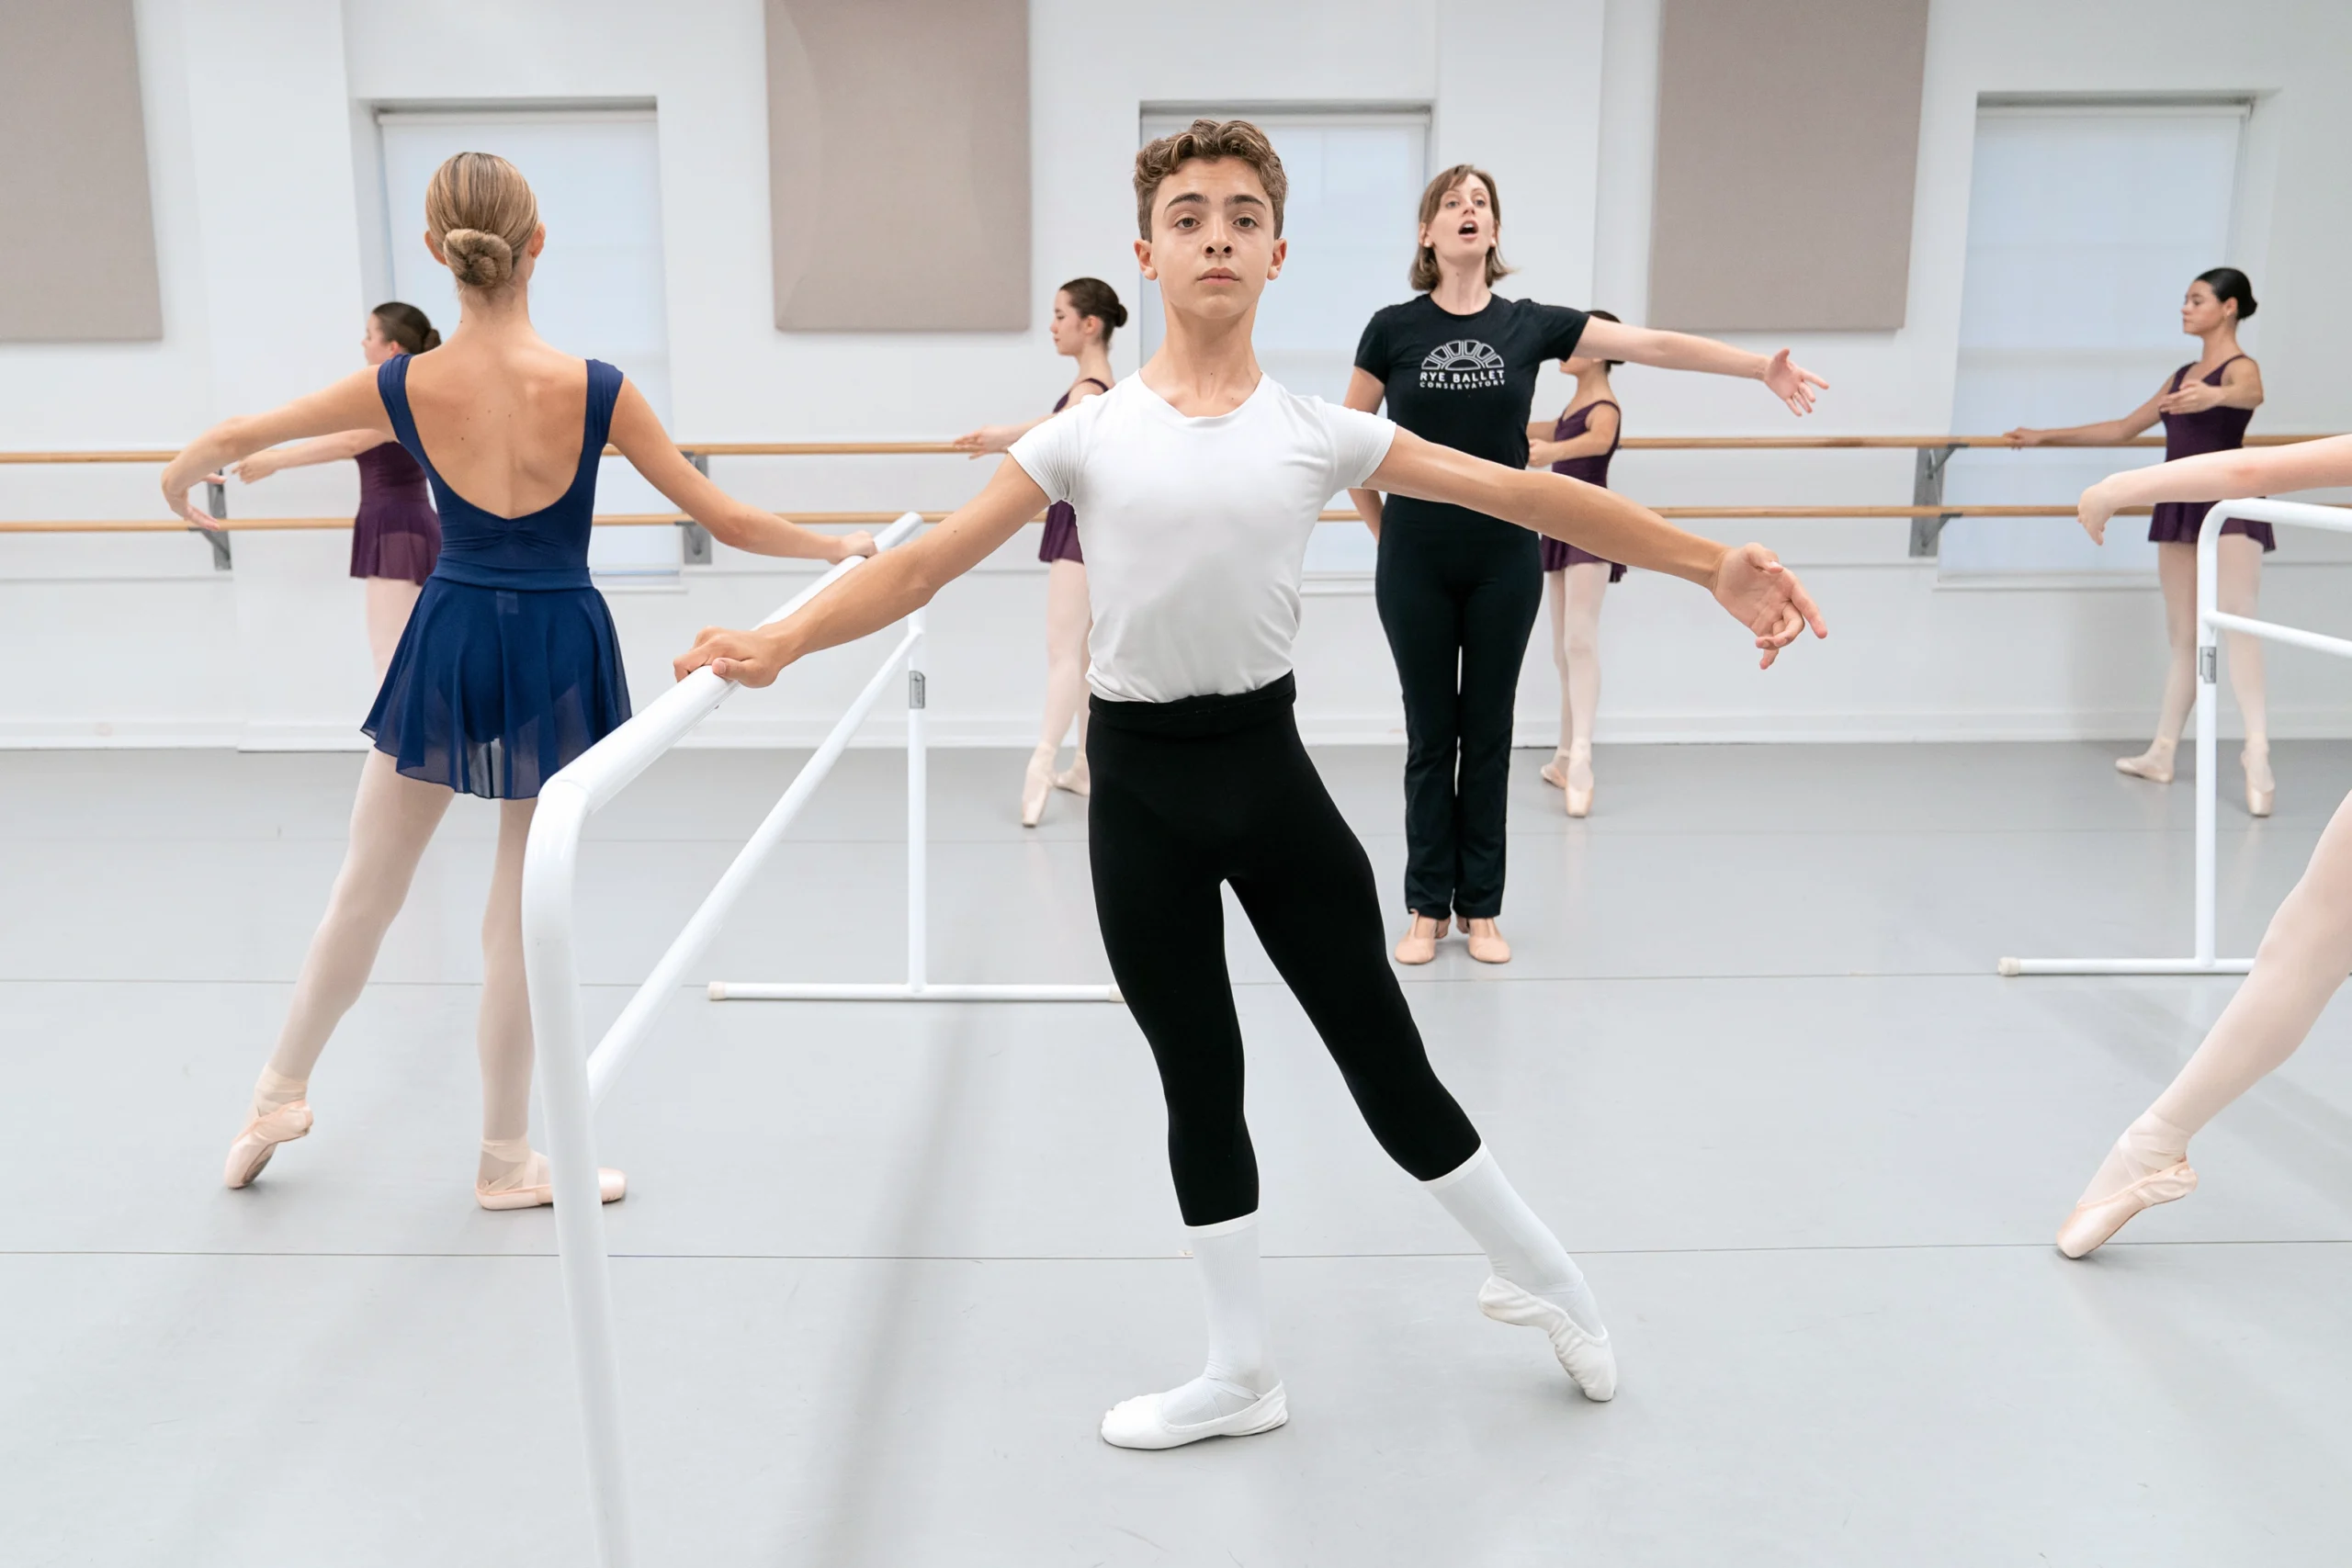 Thirteen-year-old Matthew Fontana, a ballet student, takes ballet class at a dance studio. He holds onto a portable barre with his right hand and does a tendu a la seconde with his left leg. He wears a white t-shirt, black tights, white socks and white ballet slippers. He is surrounded by female classmates who do the same exercise and how wear blue or purple leotards, pink tights, and pink pointe shoes. Their teacher, in a black t-shirt and yoga pants, stands among them with her feet in parallel and her left arm out in second position, talking to them as they dance.